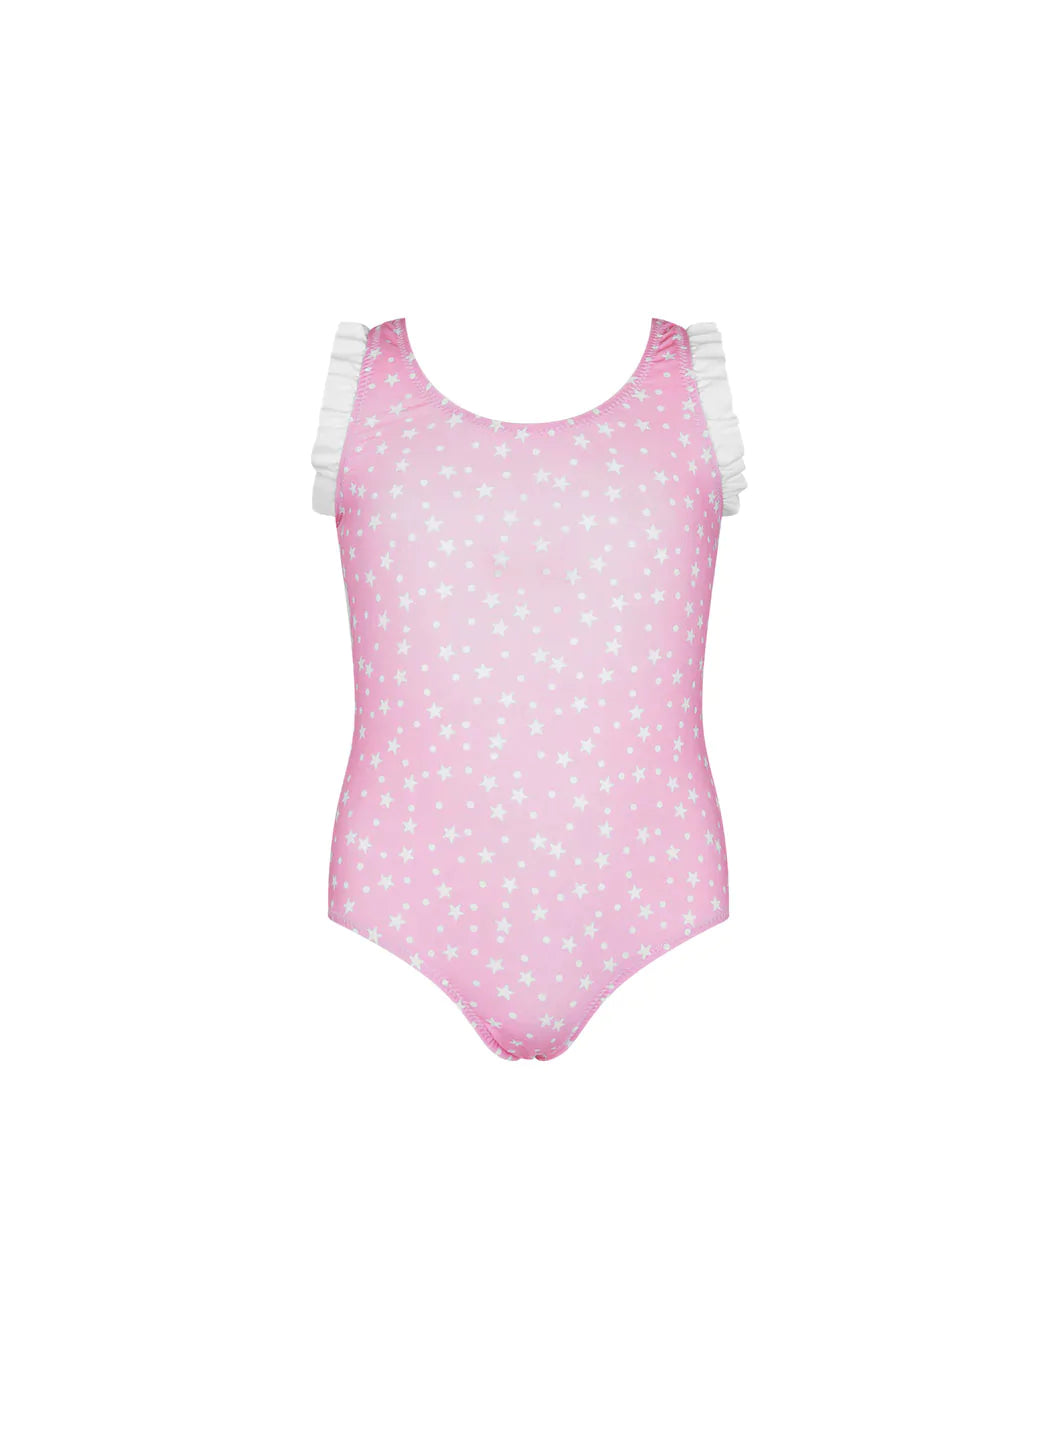 Baby_Millie_Pink_Stars_Swimsuit_Cutout_2023